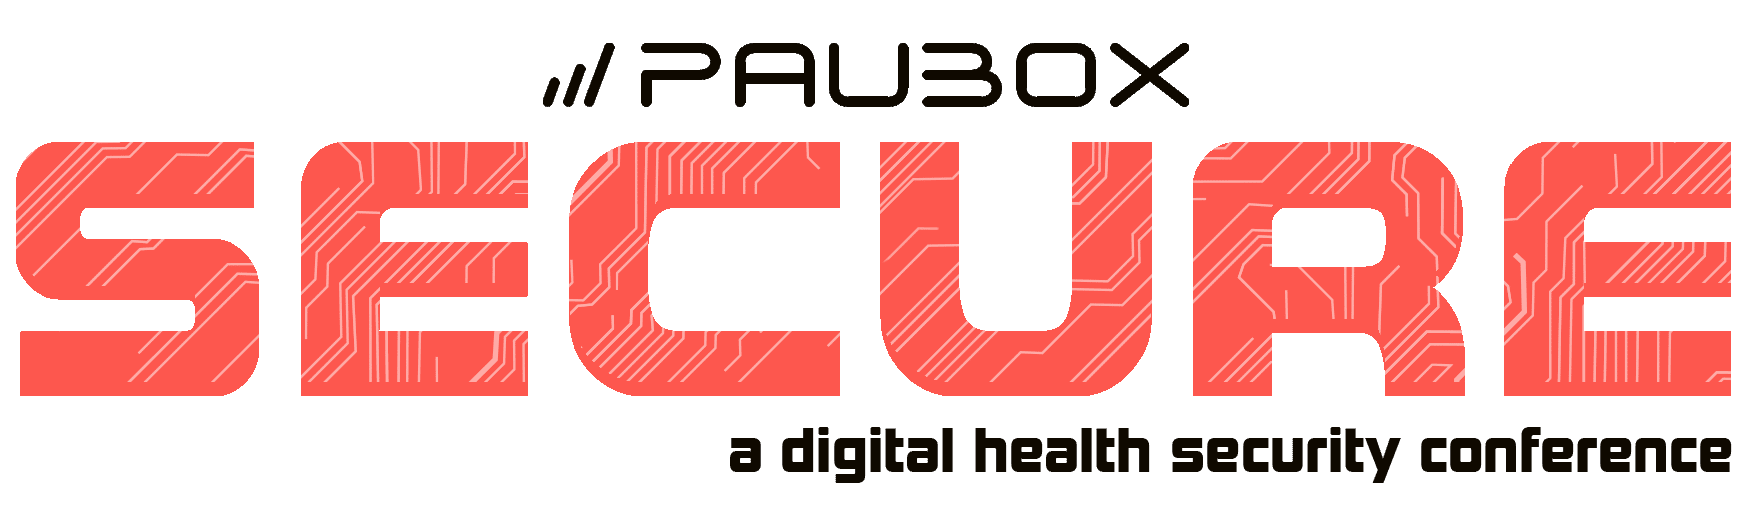 Three sponsors join Paubox SECURE Conference